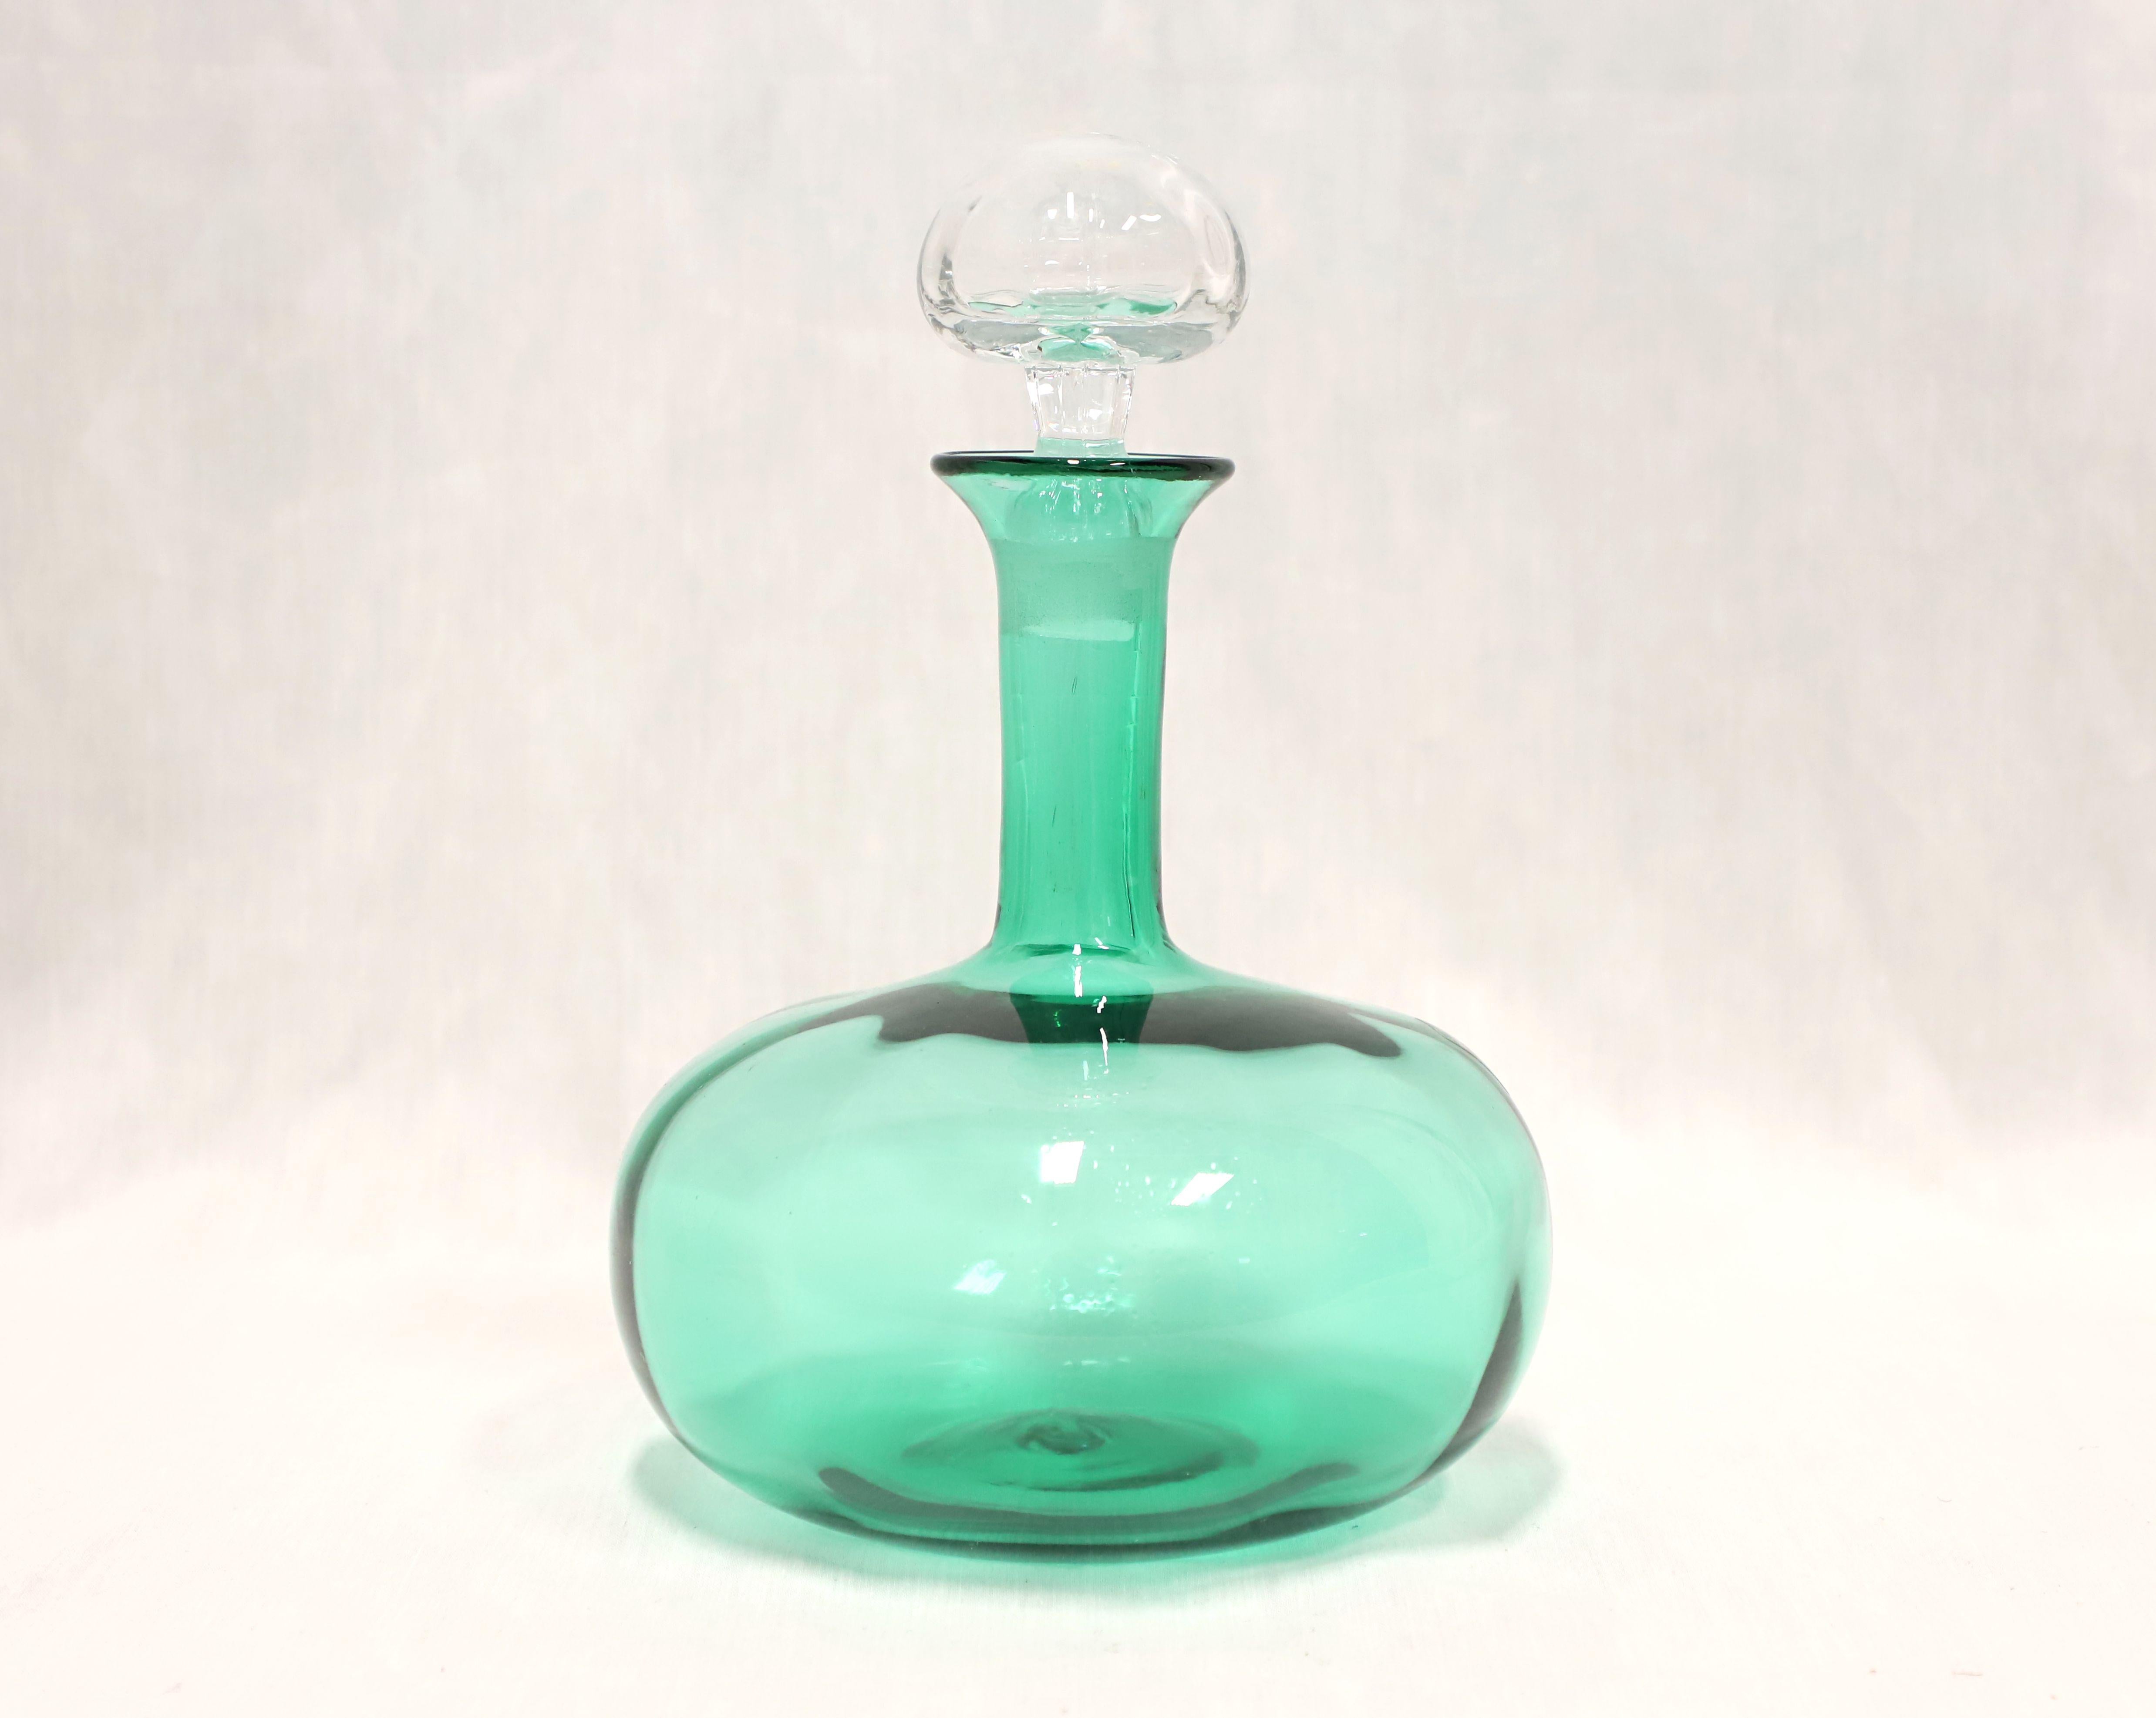 American BLENKO Mid 20th Century Hand-Blown Green Glass Decanter For Sale